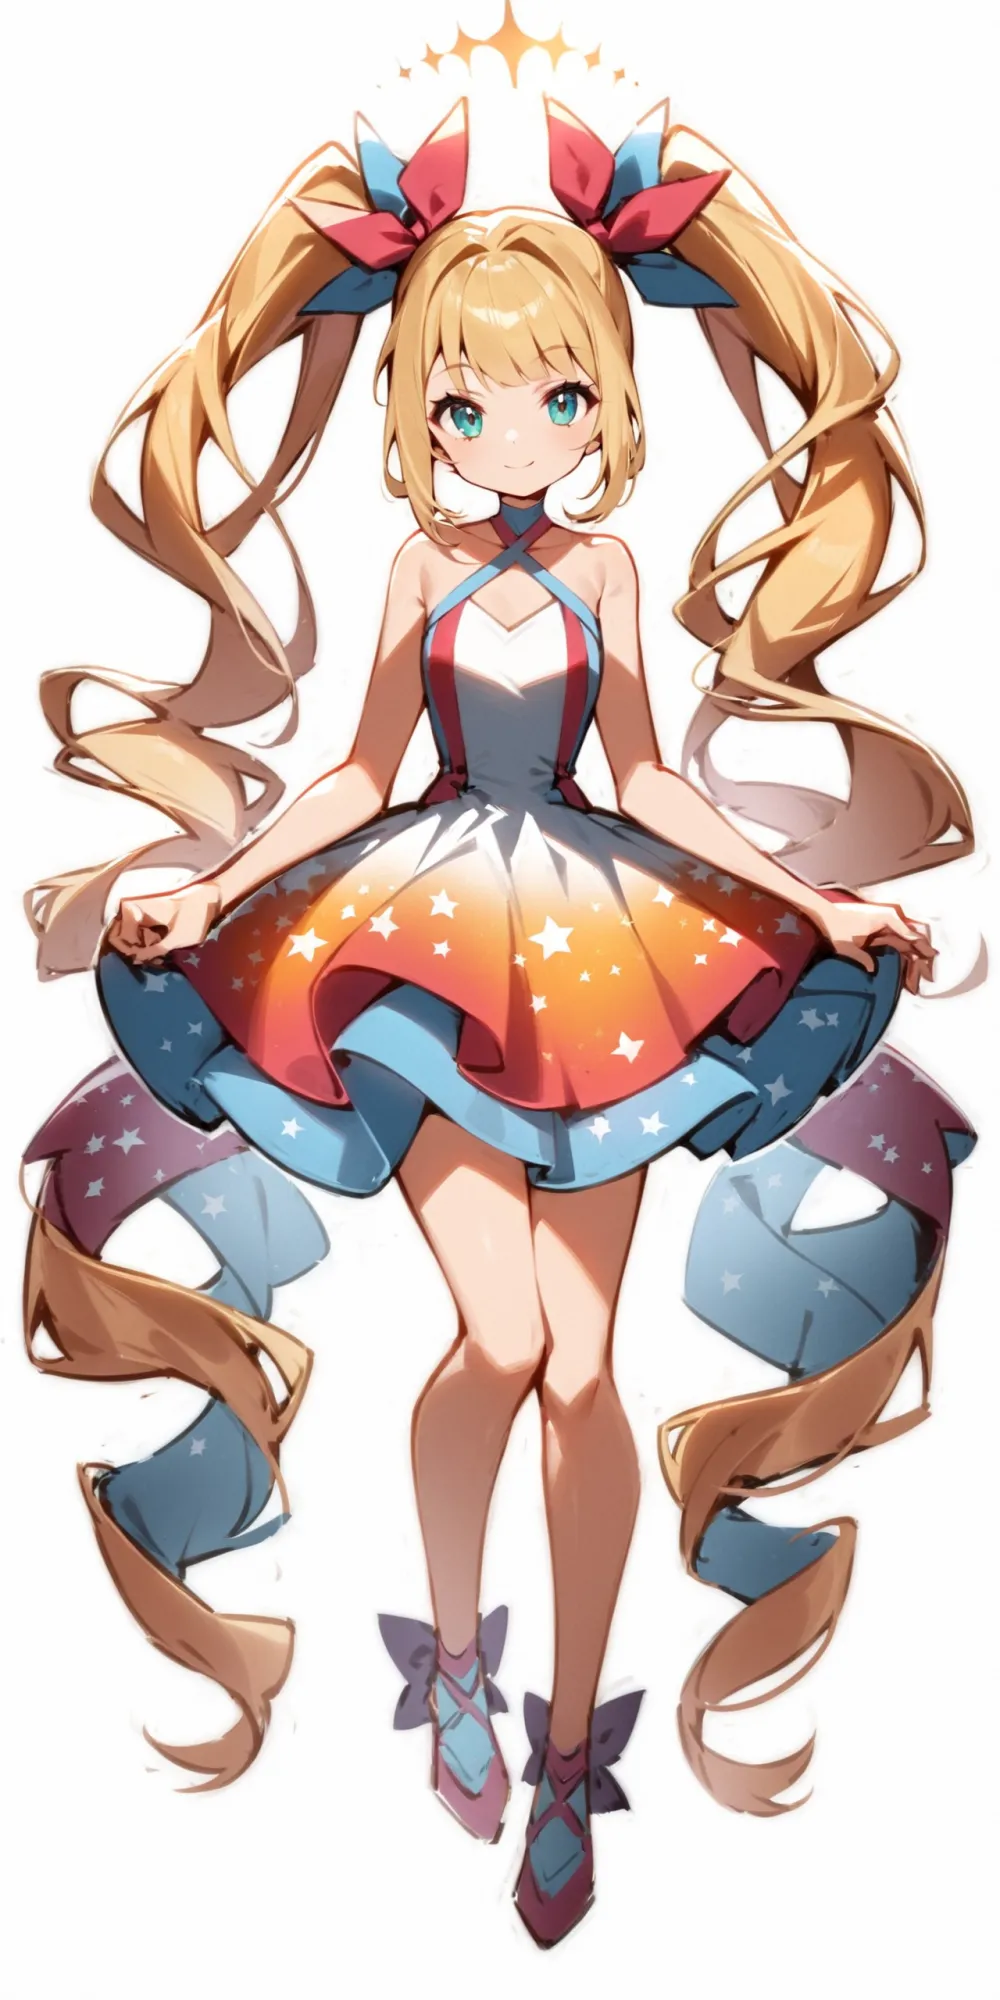 '1girl, halter dress, blonde hair, twintails,\nsmile, closed mouth,\ntachi-e, fullbody, white background,\nAlice in glitterworld\nNegative prompt: (worst quality, low quality:1.4), nsfw\nSteps: 35, Sampler: DPM++ 2M SDE Karras, CFG scale: 7, Seed: 1, Size: 640x1280, Model hash: 642b08ca49, Model: ConfusionXL2.0_fp16_vae, VAE hash: 63aeecb90f, VAE: sdxl_vae_0.9.safetensors, Denoising strength: 0.6, Clip skip: 2, Hires upscale: 2, Hires steps: 15, Hires upscaler: ESRGAN_4x, Eta: 0.68, Version: v1.7.0'